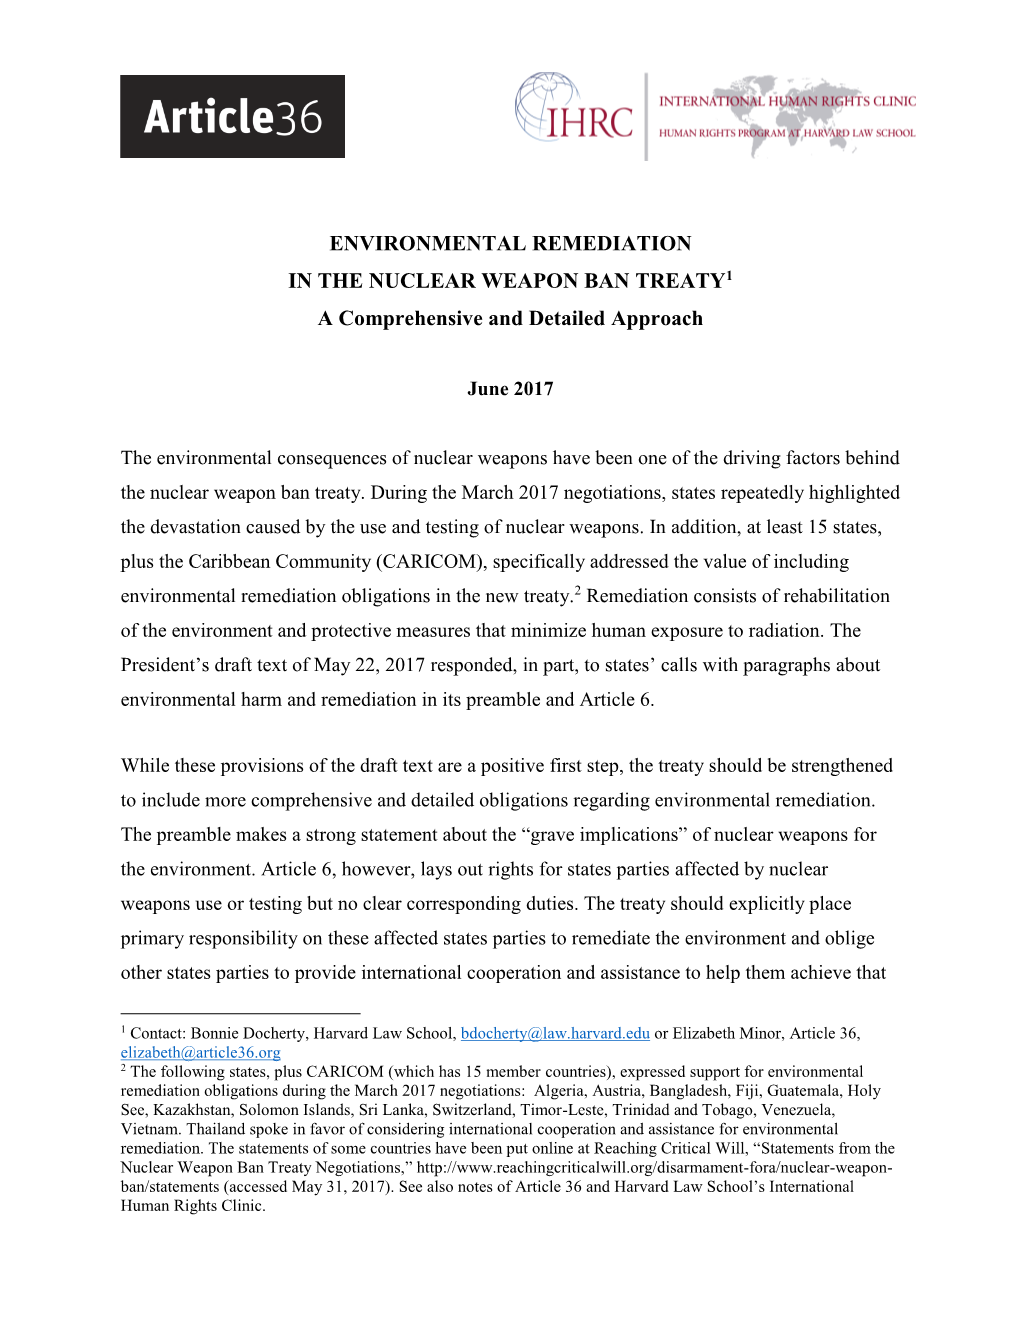 Environmental Remediation in Nuclear Weapon Ban Treaty